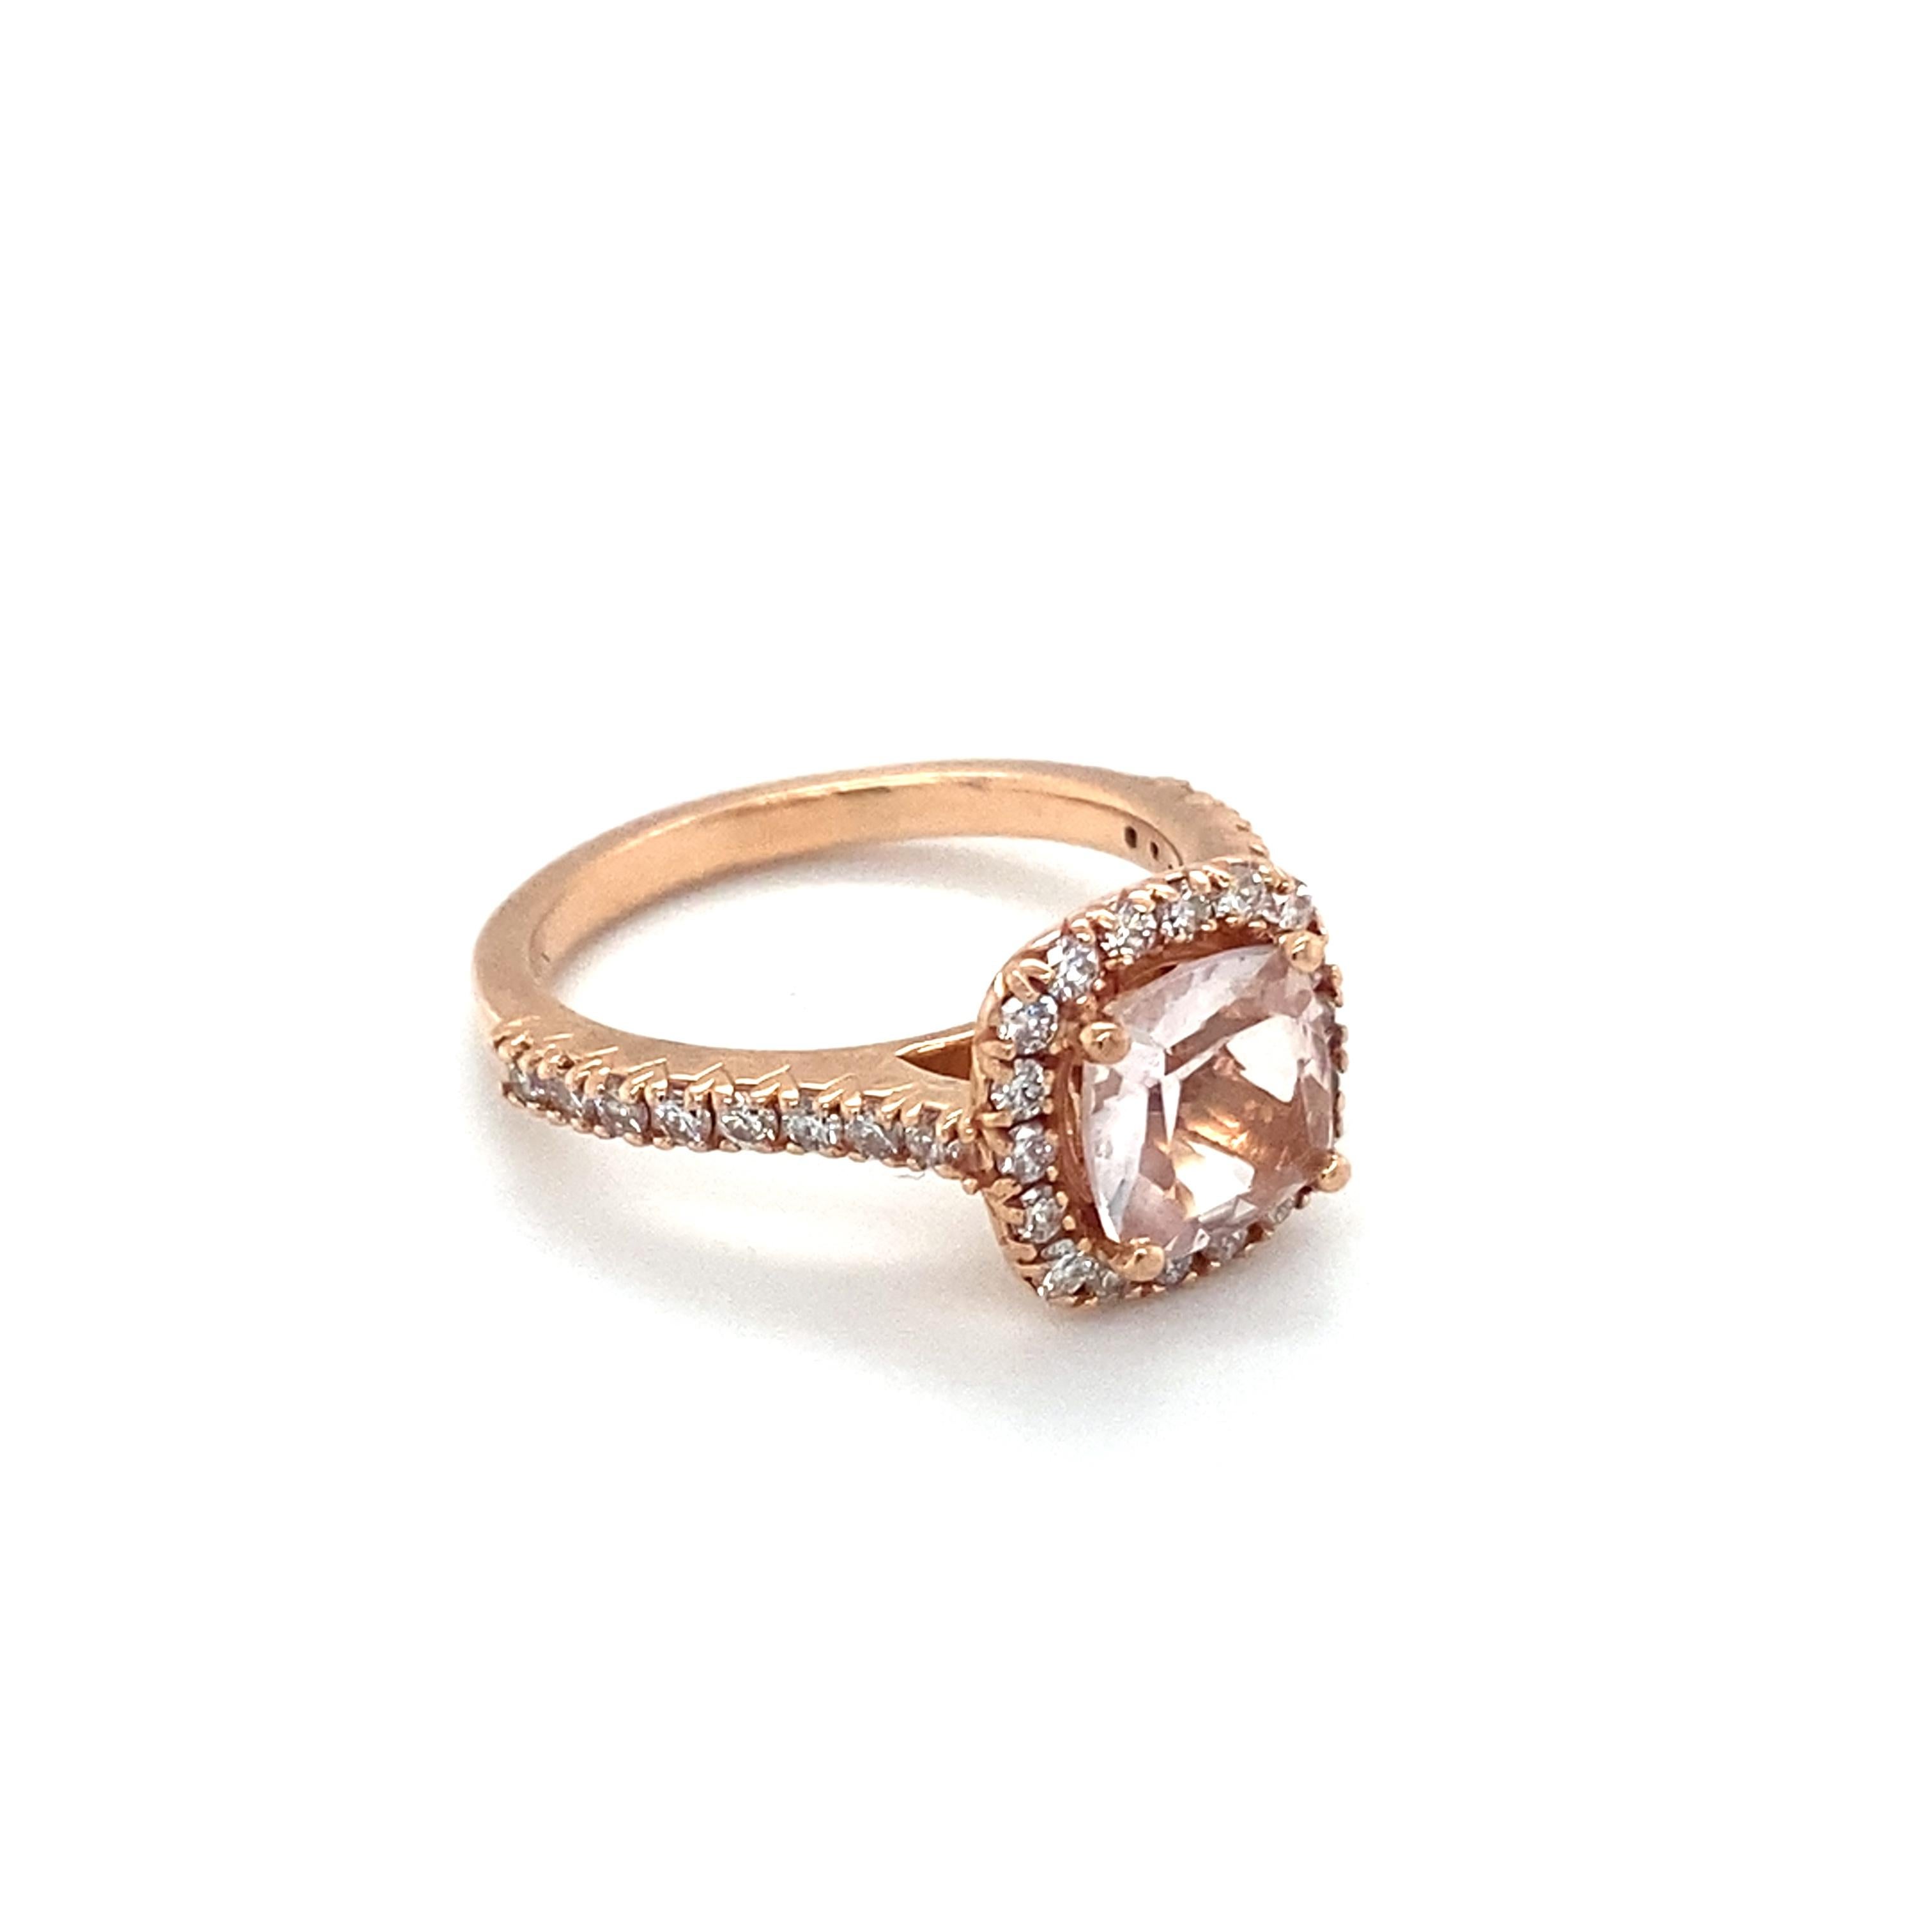 Item Details:
Modern Ring, made by Verma Group featuring Morganite center stone and Diamonds
Size:  6 (can be resized)
Metal: 14 Karat Rose Gold
Weight: 4.12 grams

Diamond Details:
Carat: 0.40 carat total weight
Cut: Round
Color: G-H
Clarity: